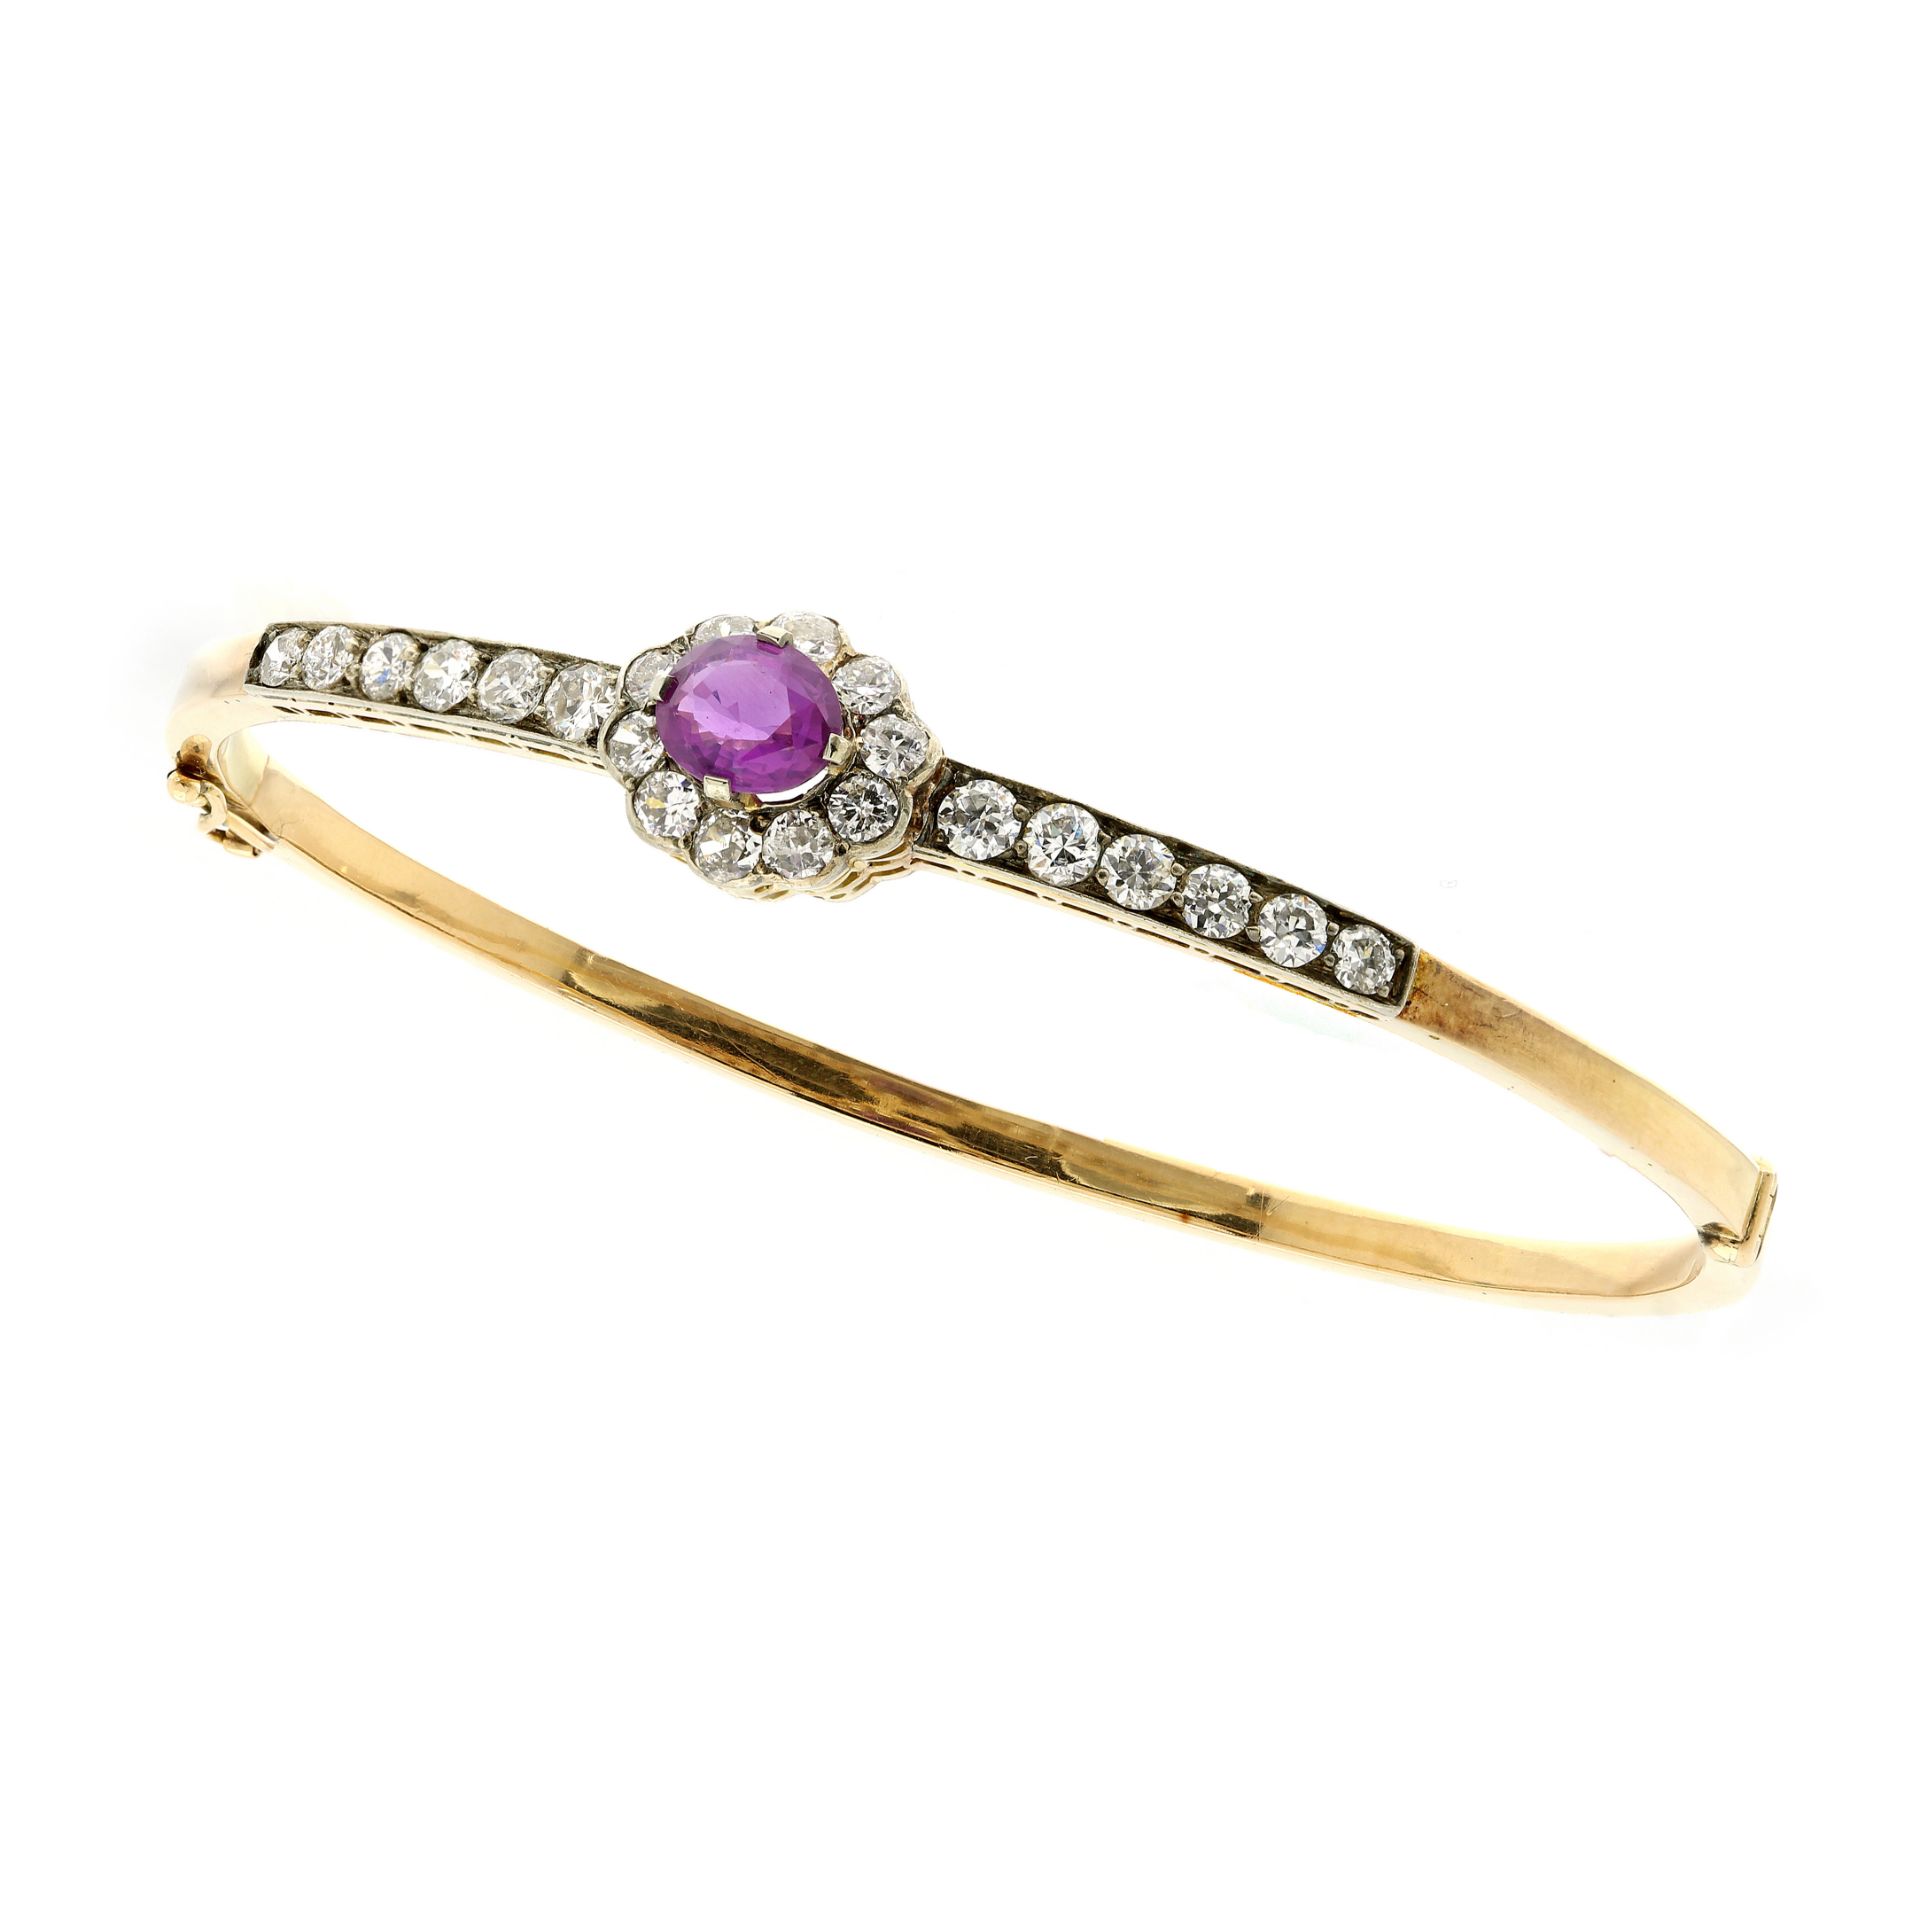 A PINK SAPPHIRE AND DIAMOND BANGLE in high carat yellow gold, set with a central oval cut pink